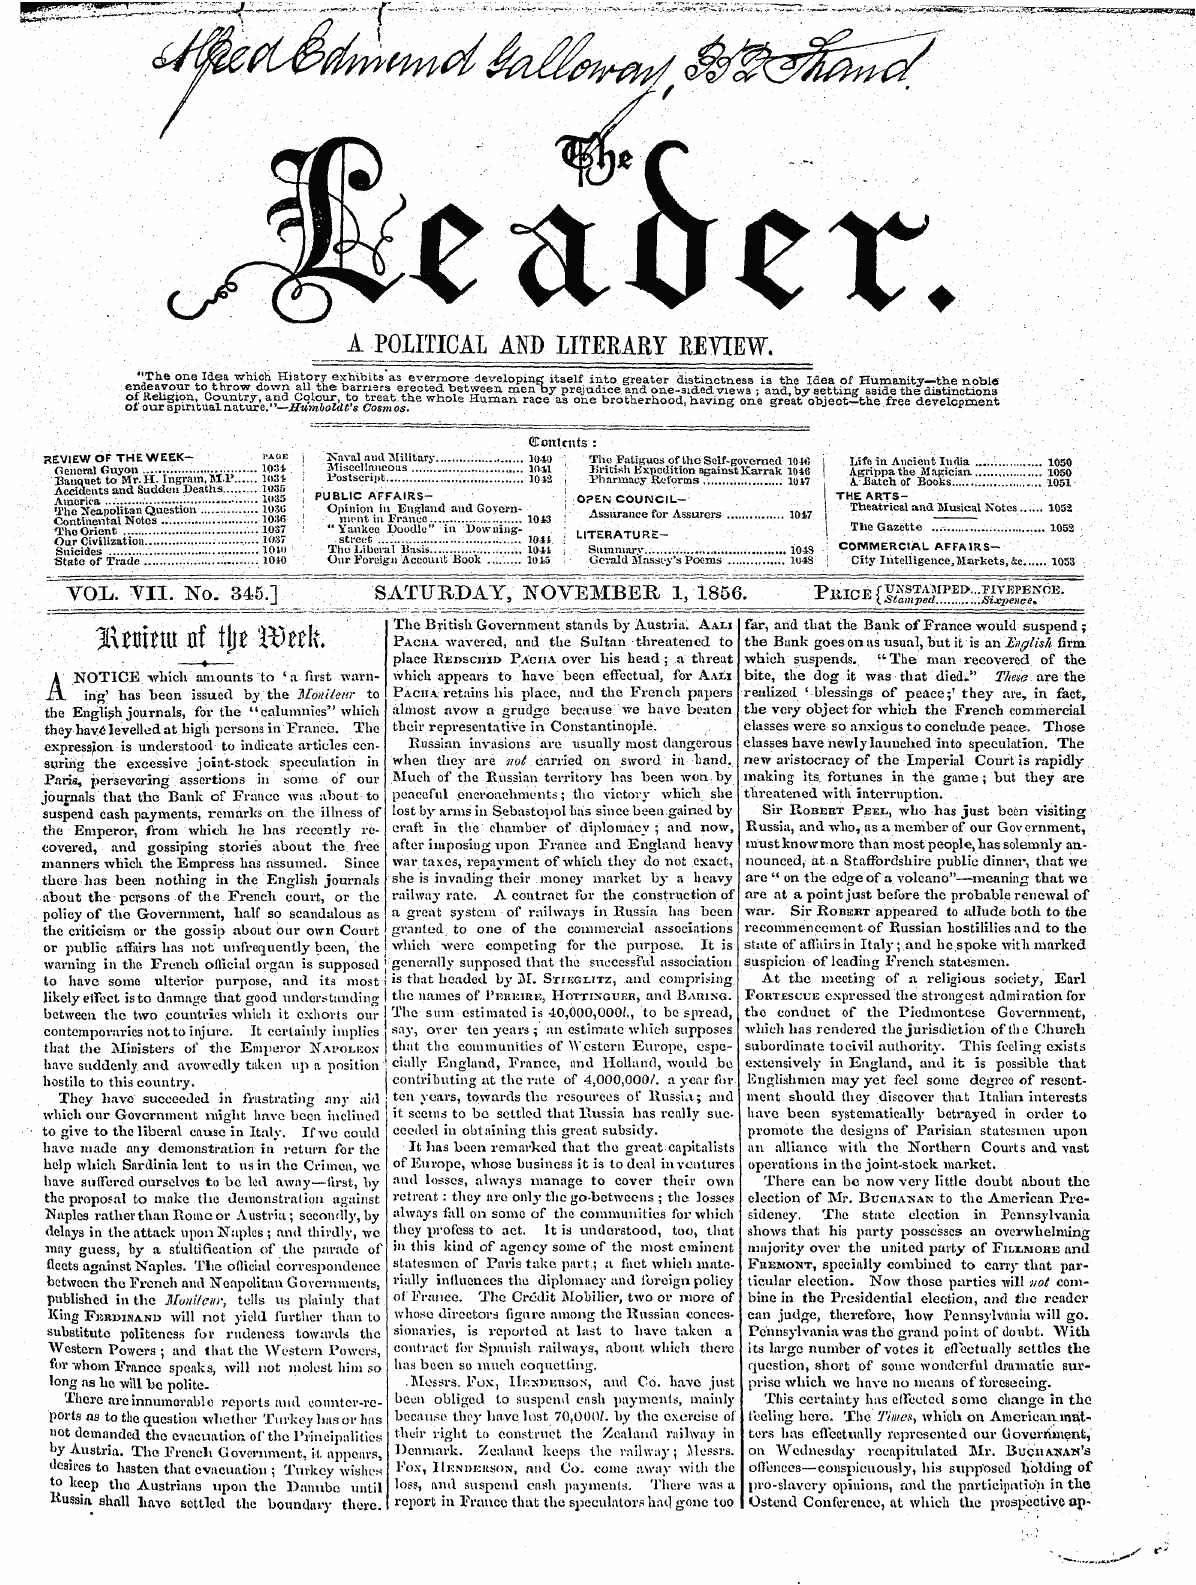 Leader (1850-1860): jS F Y, 2nd edition - ¦ ; ' . ' . ¦ ' , ¦ \ ' . . '¦¦' ; ¦ . . . ¦ ¦ ¦ ¦ . ¦ .- -¦ ' ¦ • : ¦ Contents : : ¦ ¦ ' . . -¦¦ . " ' ¦ _ ¦ .. ¦' .. ' ¦ - ¦"¦ ' . ' .